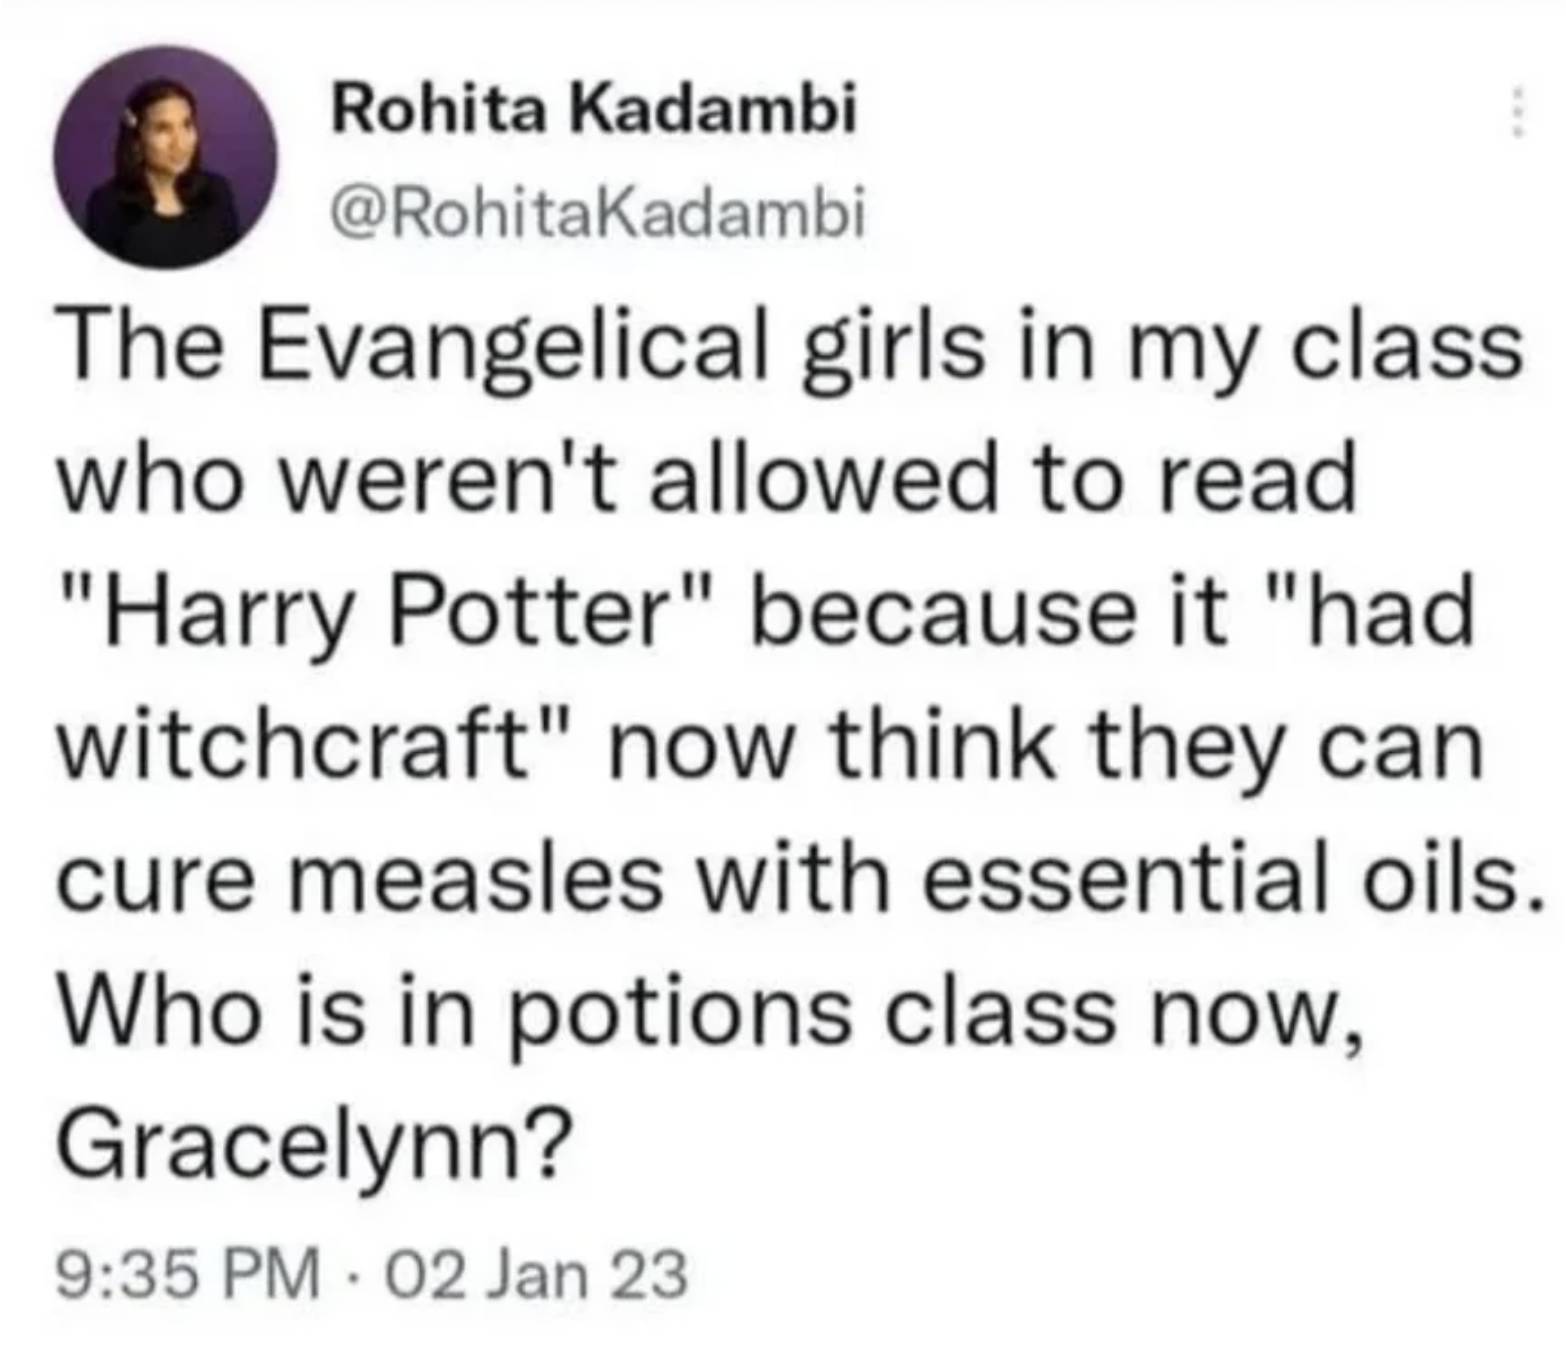 screenshot - Rohita Kadambi The Evangelical girls in my class who weren't allowed to read "Harry Potter" because it "had witchcraft" now think they can cure measles with essential oils. Who is in potions class now, Gracelynn? 02 Jan 23 .